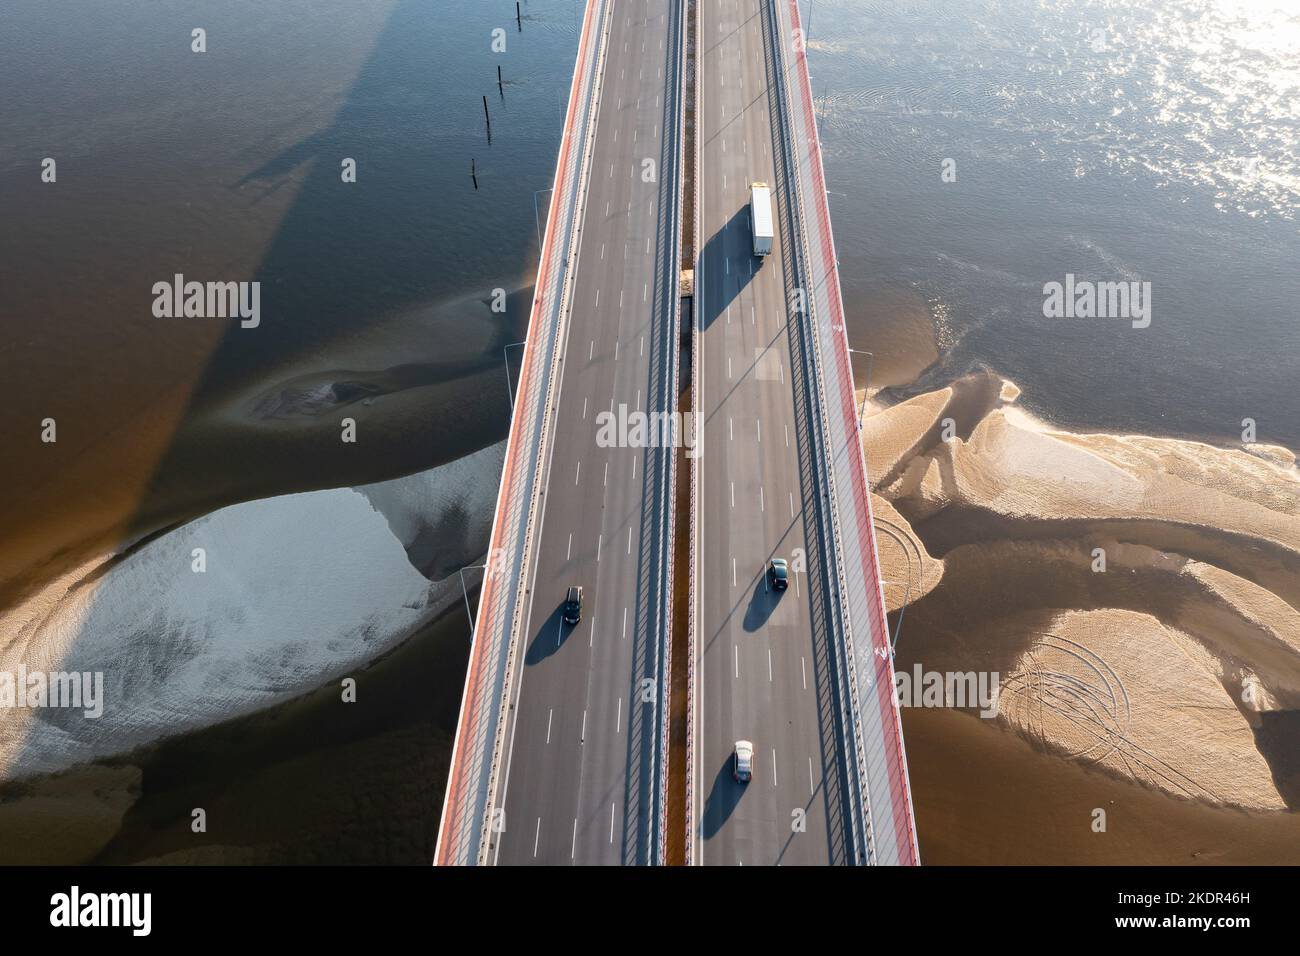 High angle view of Anna Jagiellon Bridge also called South Bridge, part of S2 expressway over Vistula River in Warsaw, capital of Poland Stock Photo